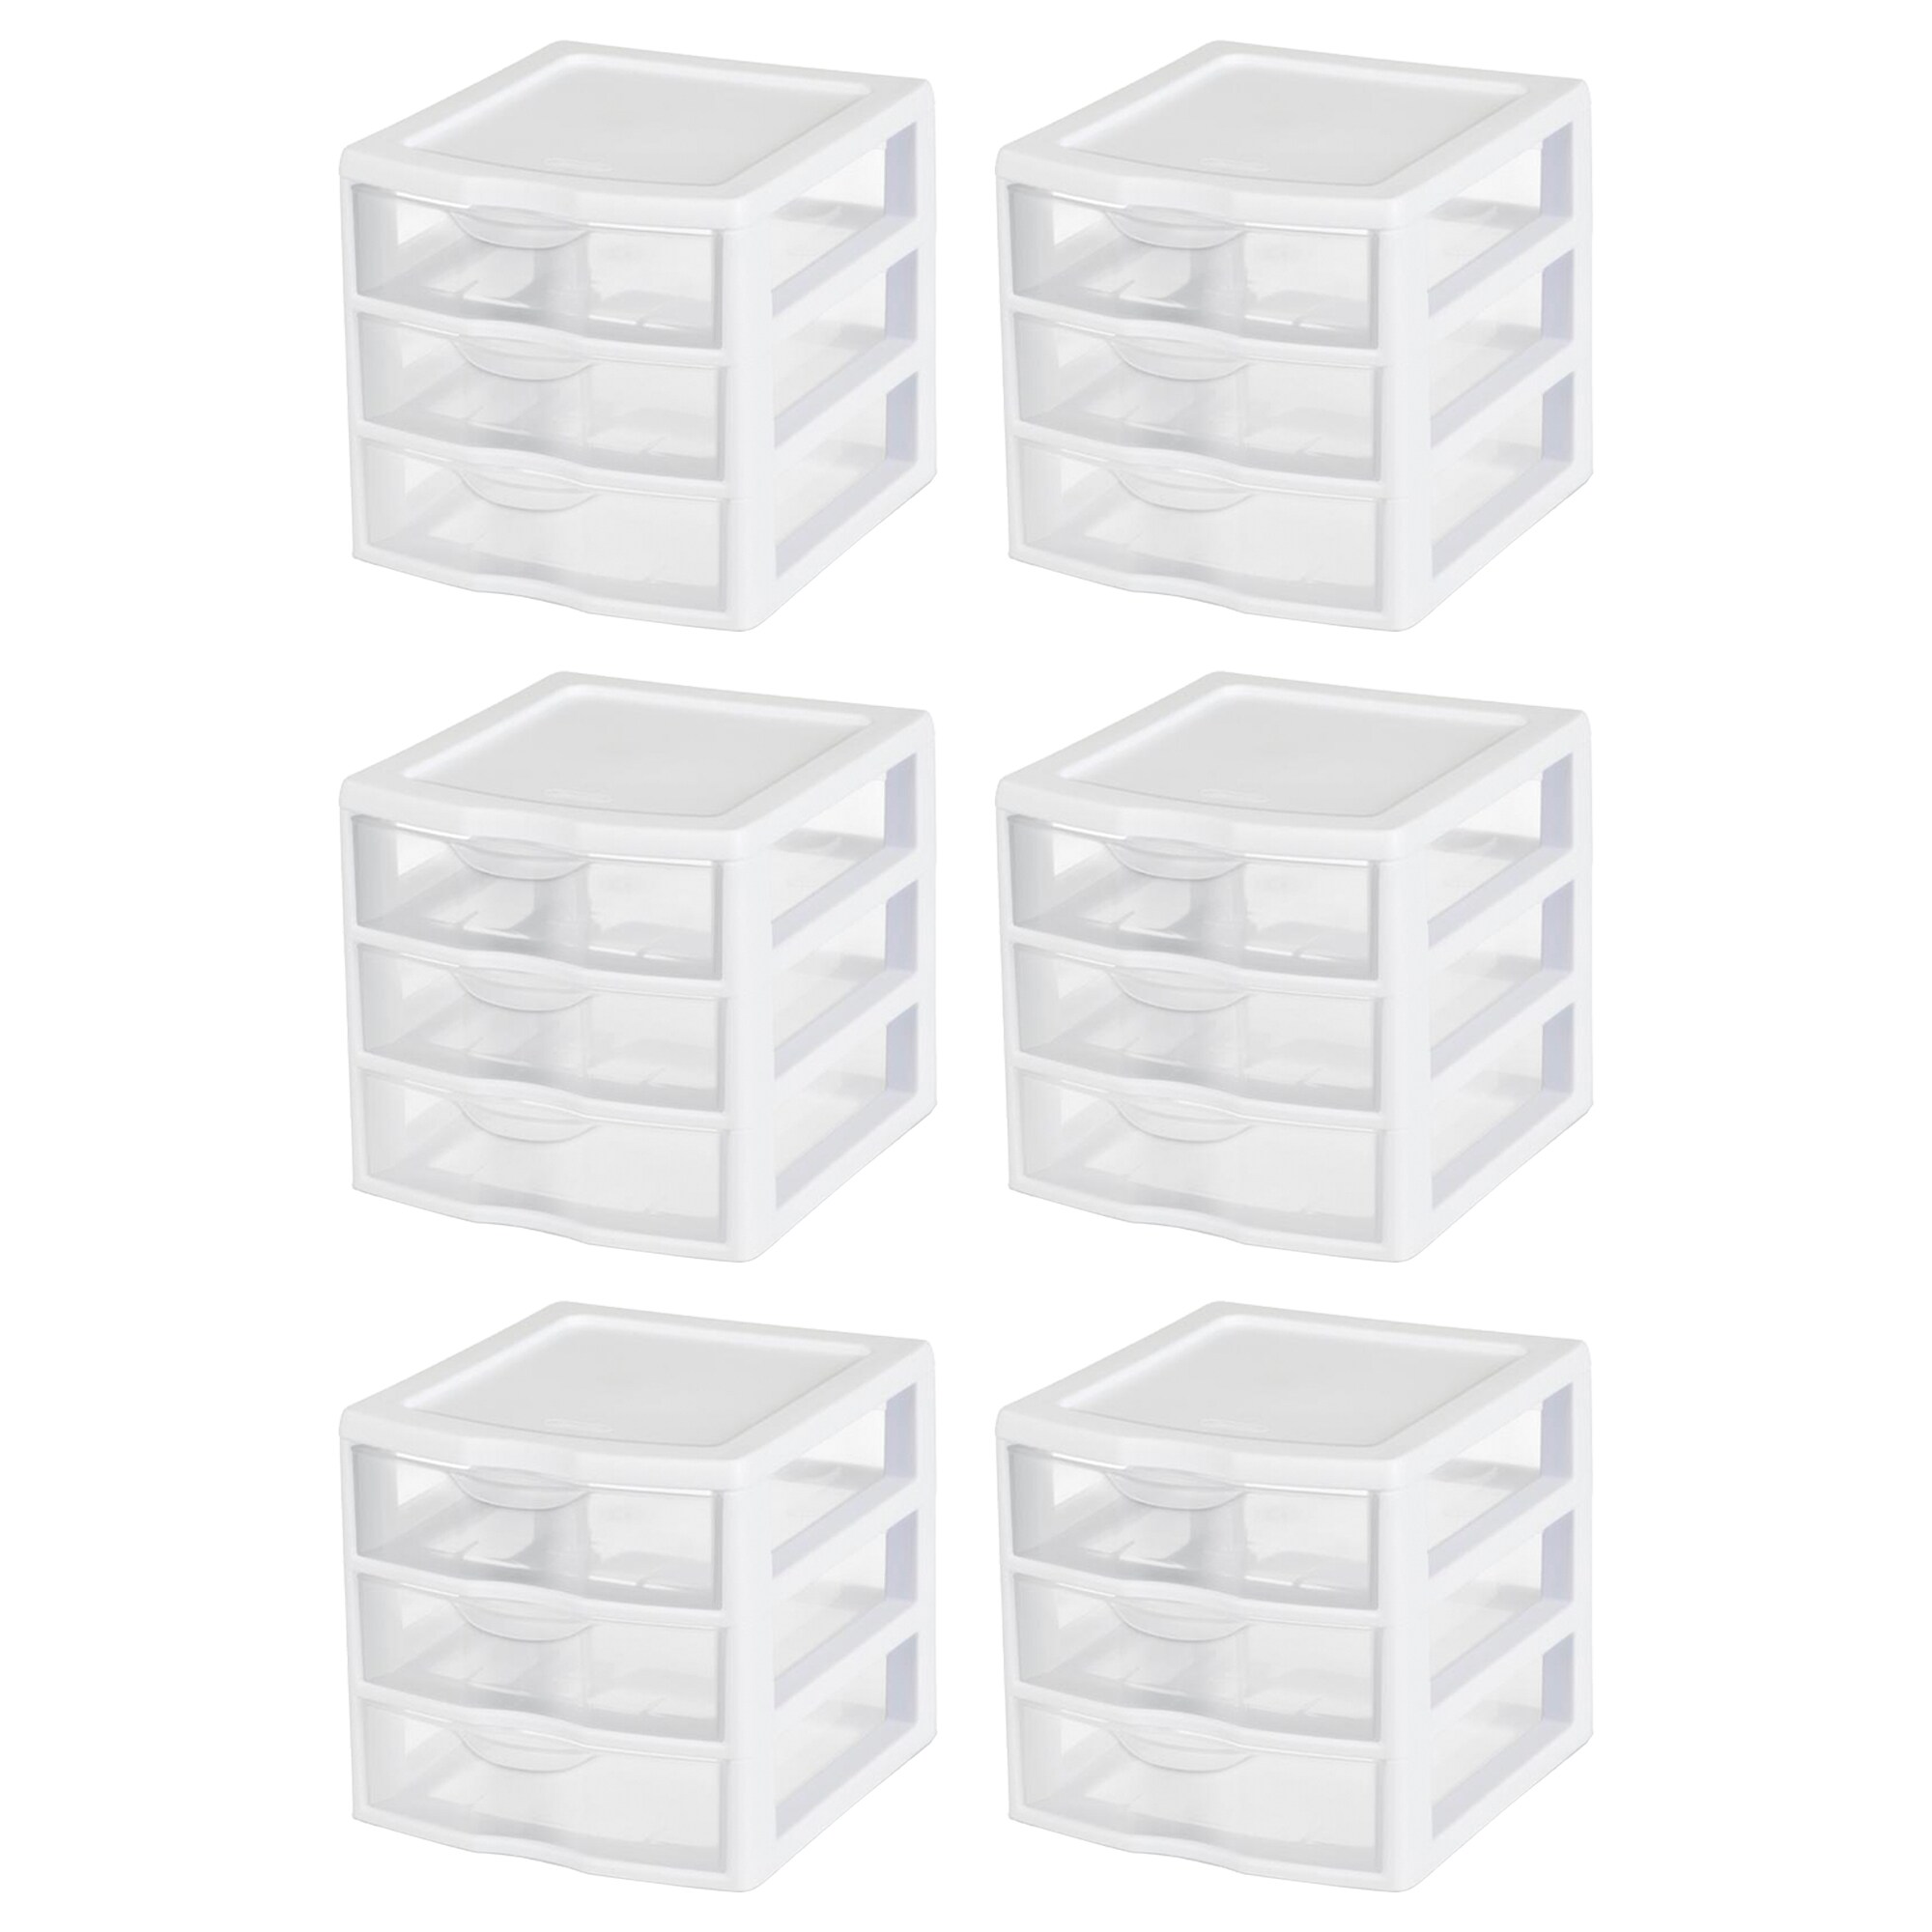 Sterilite Clearview Small 5 Drawer Desktop Storage Unit White 16 Pack